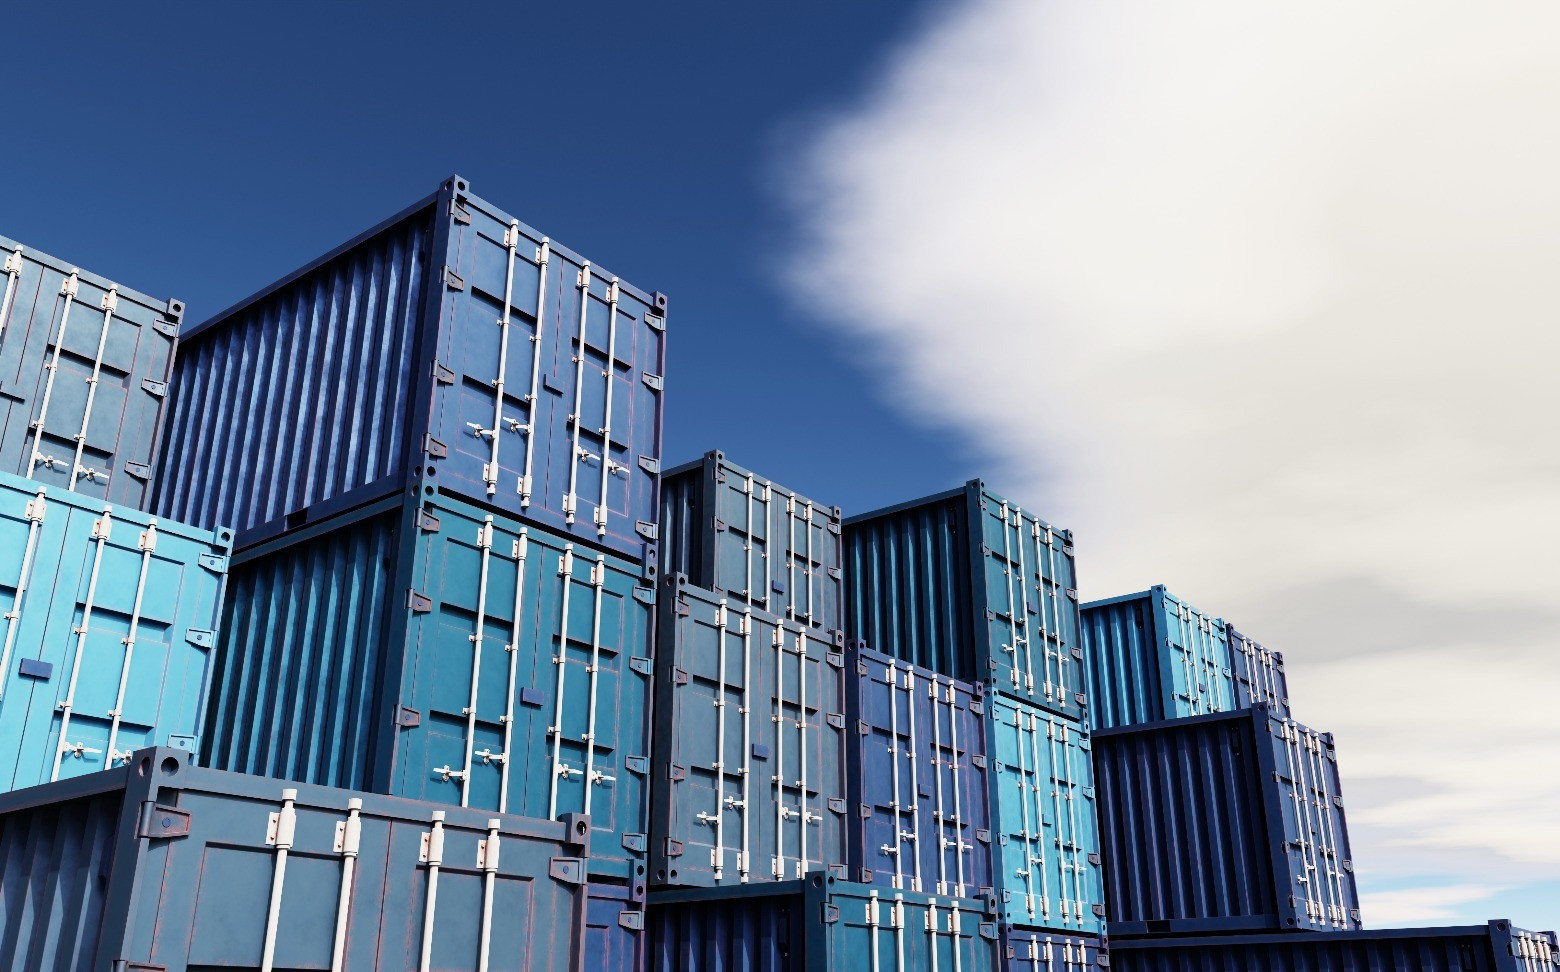 stack-blue-container-boxes-with-sky-background-cargo-freight-shipping-import-export-logistics-business-transportation-concept-3d-illustration-rendering